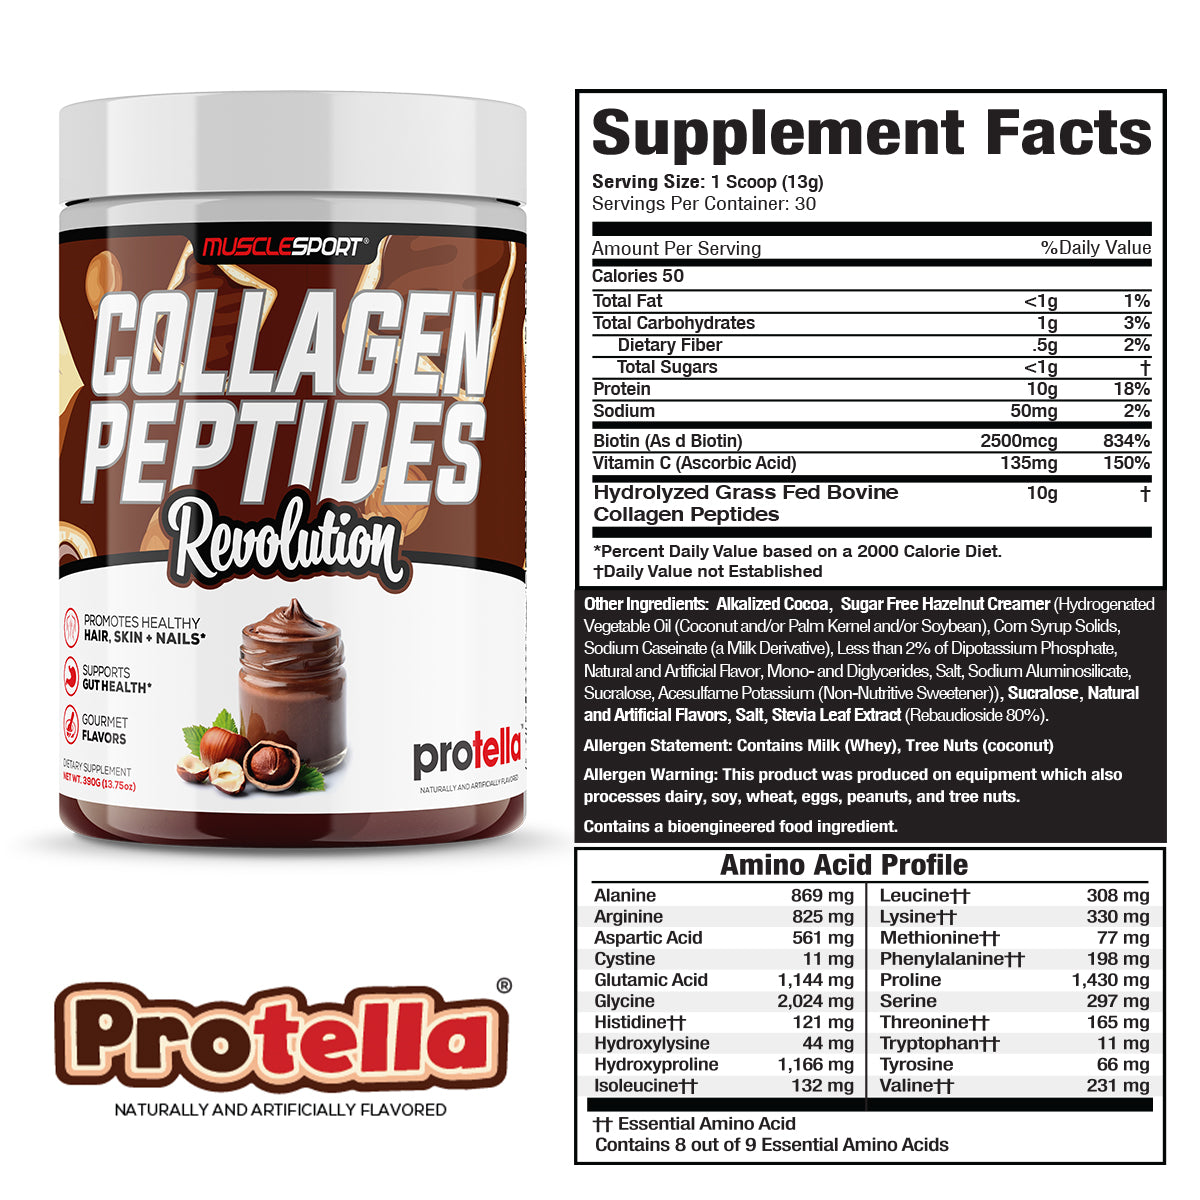 Collagen Peptides Protella Supplements Facts